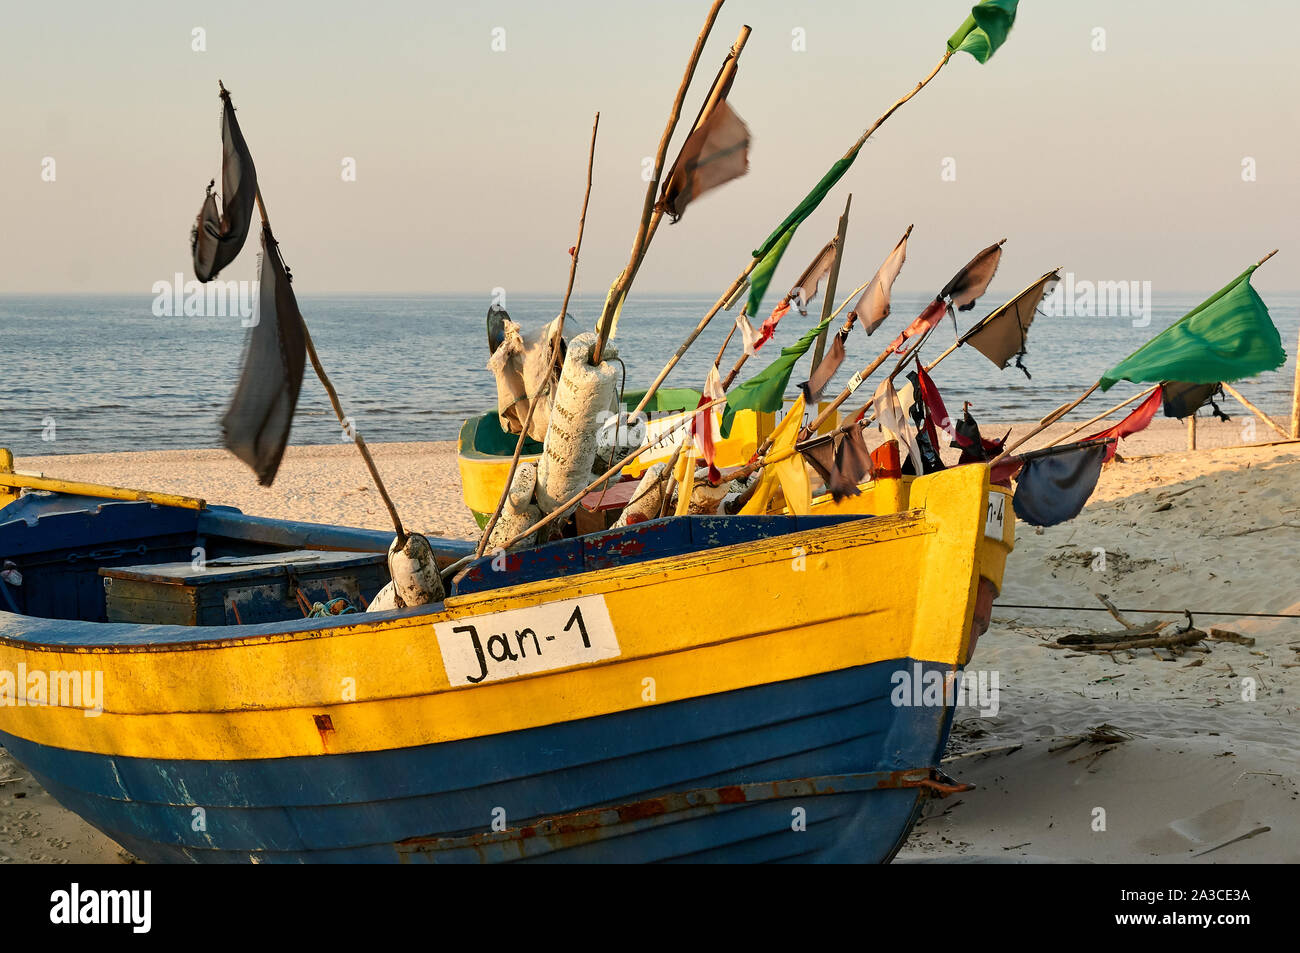 Traditional Polish fishing boats (Kutry) during a sunset on a beach near the town of Jantar, Poland. Stock Photo